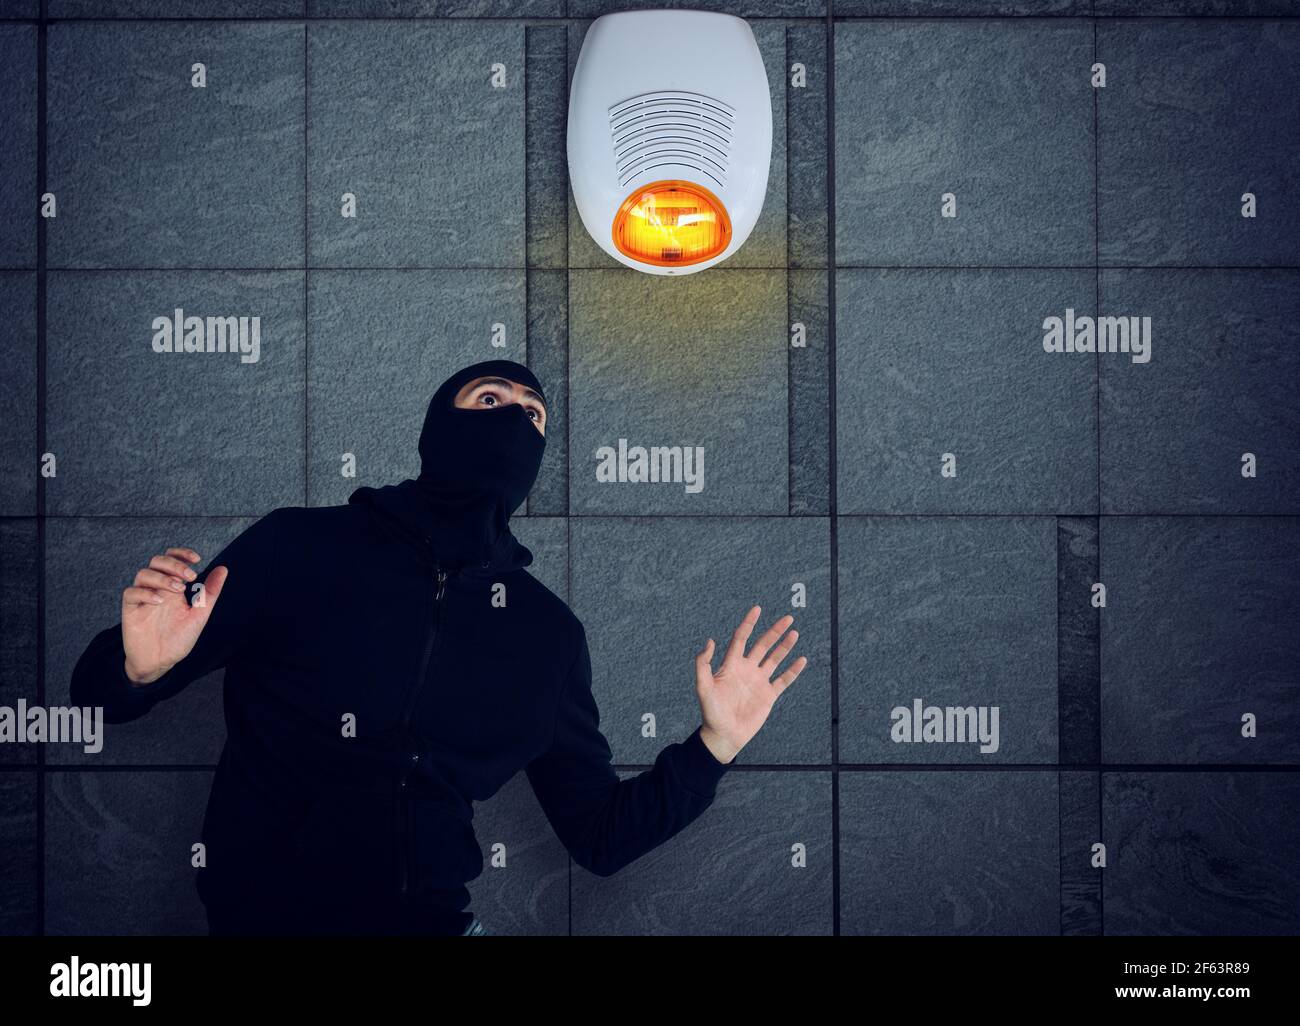 Thief with balaclava was spotted trying to steal in a apartment from the security alarm system. Scared expression Stock Photo